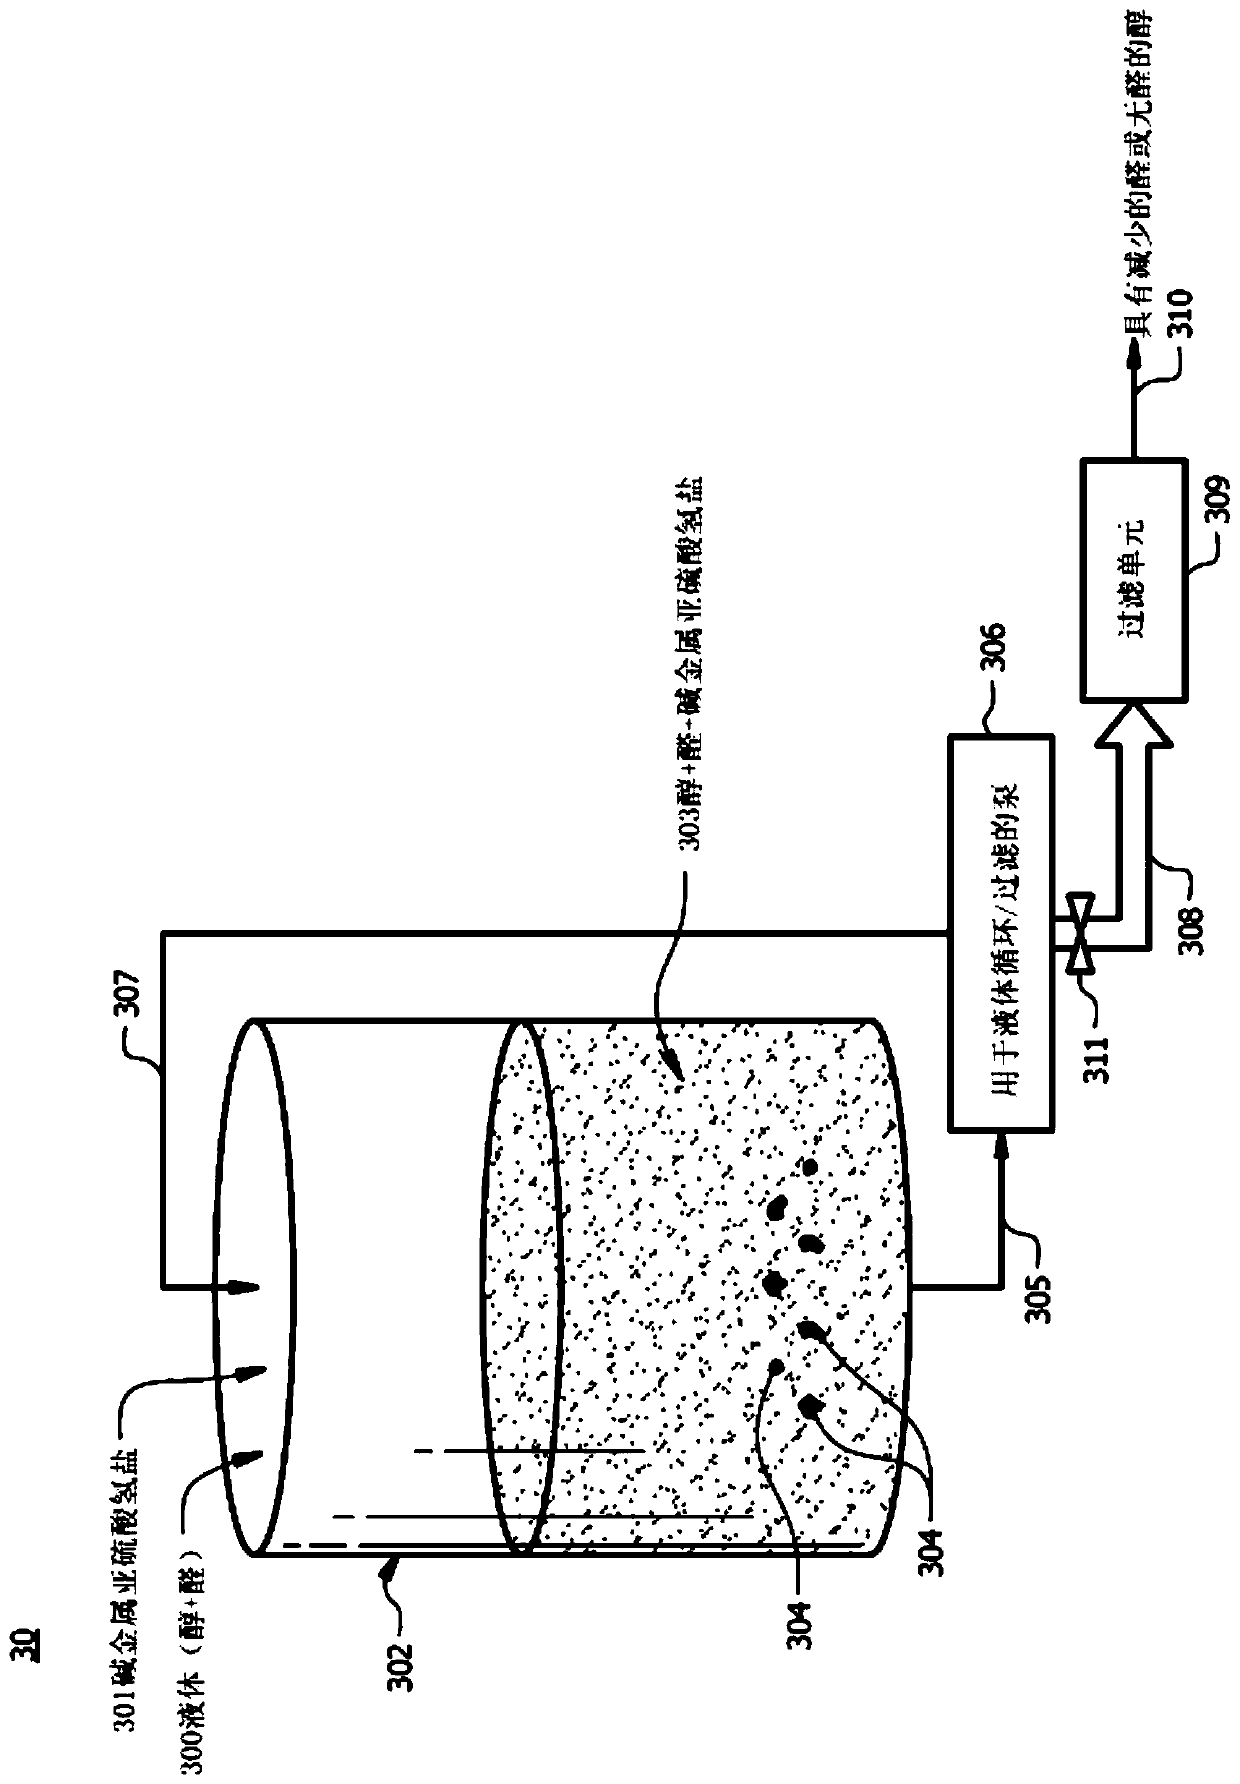 Process for aldehyde removal from alcohols by treatment with bisulphite